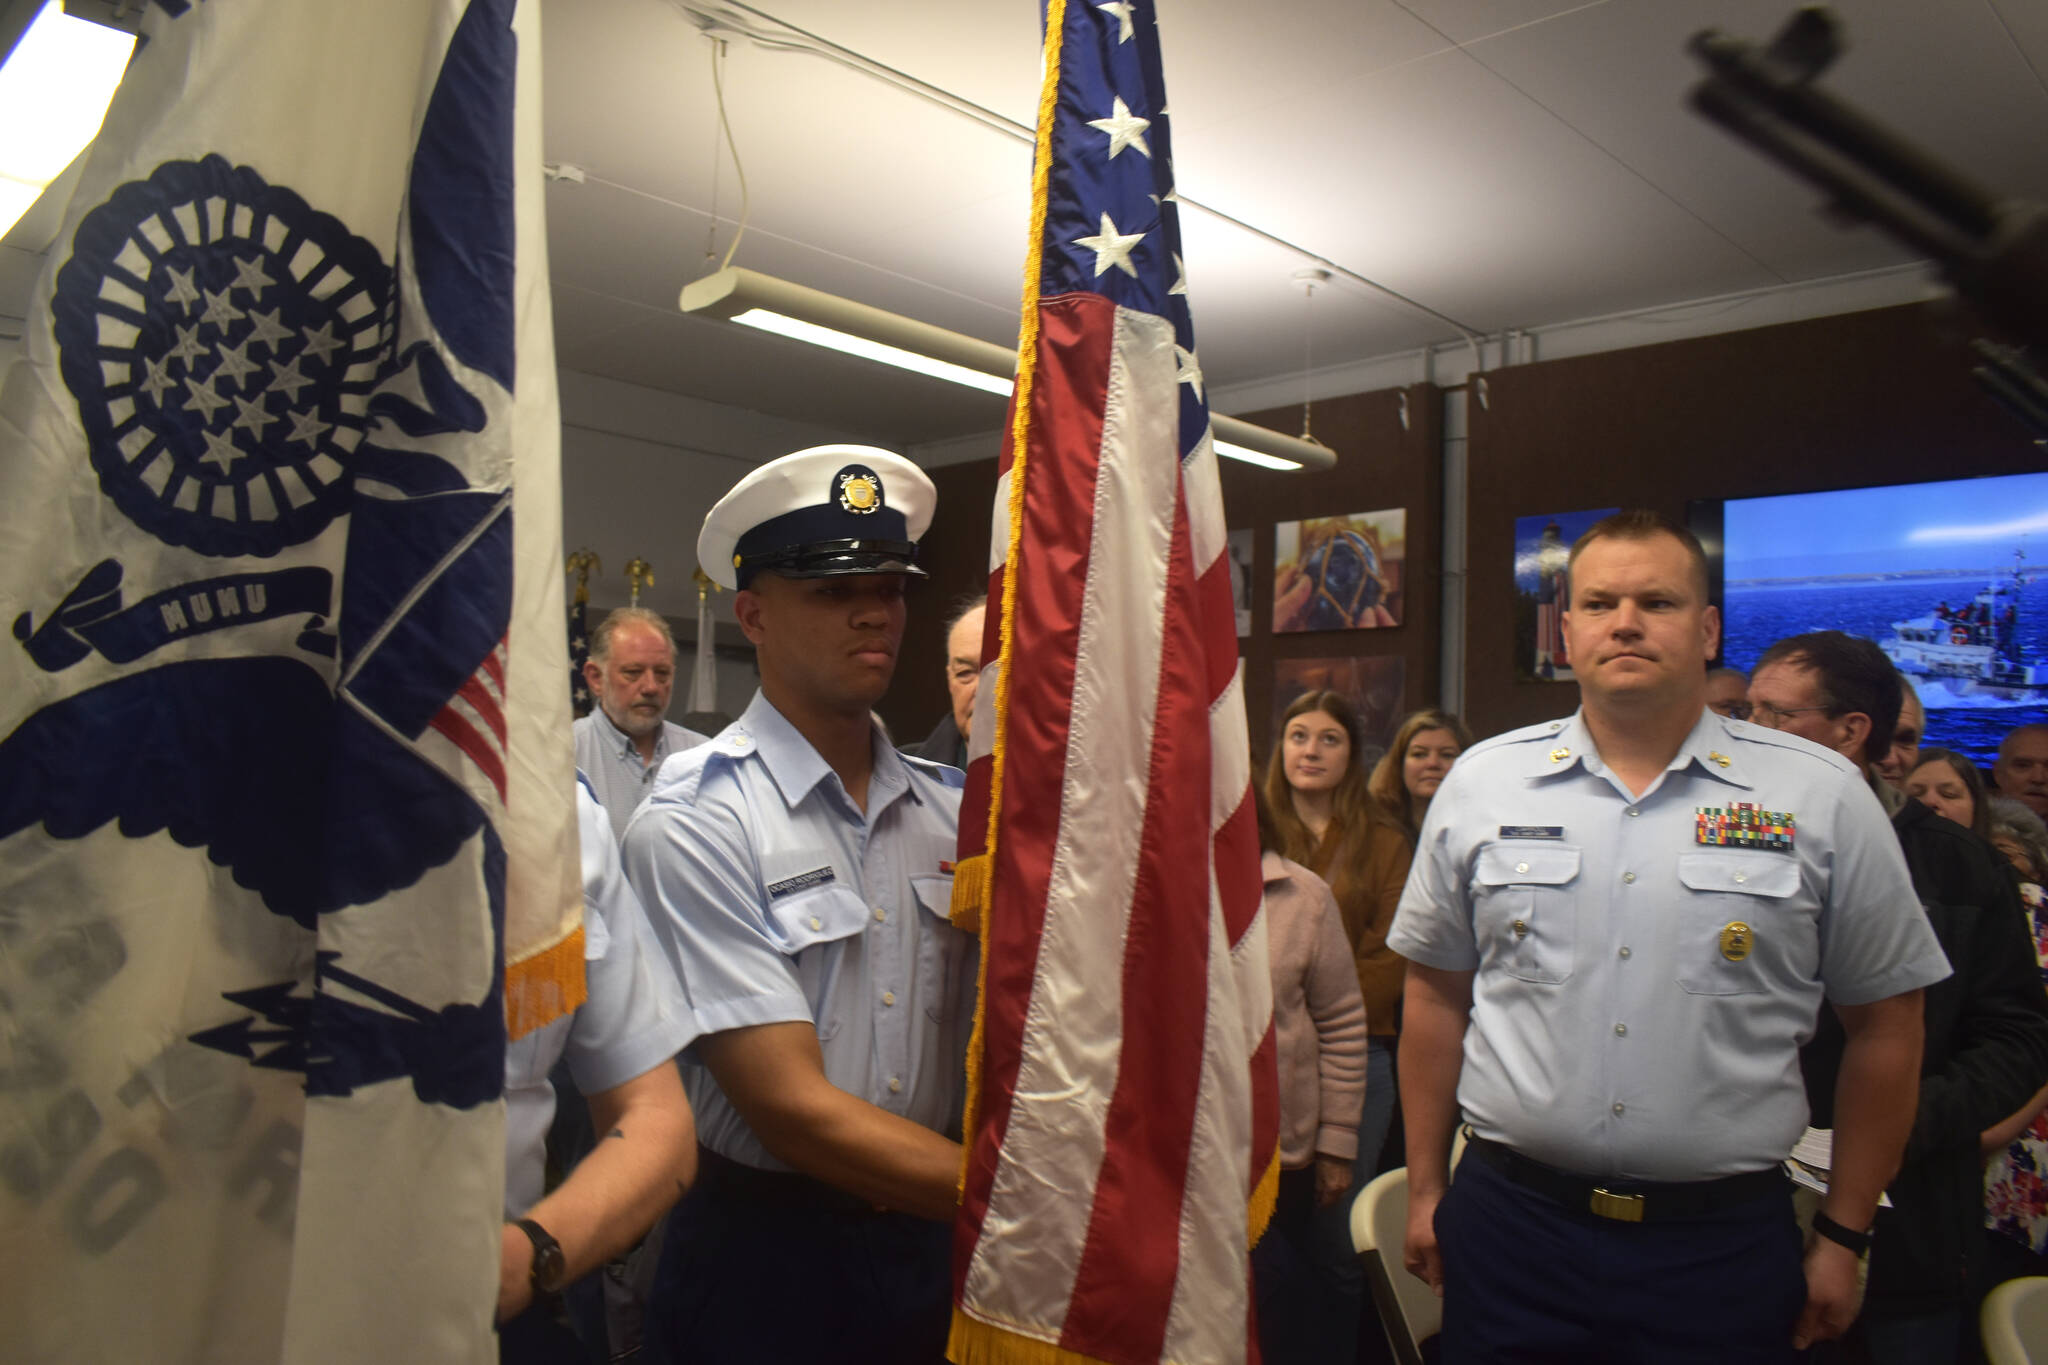 Matthew N. Wells | The Daily World
                                U.S. Coast Guard Seaman Ocasio Rodriguez, of the Coast Guard Honor Guard, carefully transports the U.S. Flag in front of Master Chief Shane Caroll, Command Master Chief for the Coast Guard’s 13th District, during a Colors presentation on Saturday, May 28, 2022, at the City of Westport’s Coast Guard City Designation Ceremony inside Westport Maritime Museum’s McCausland Hall.